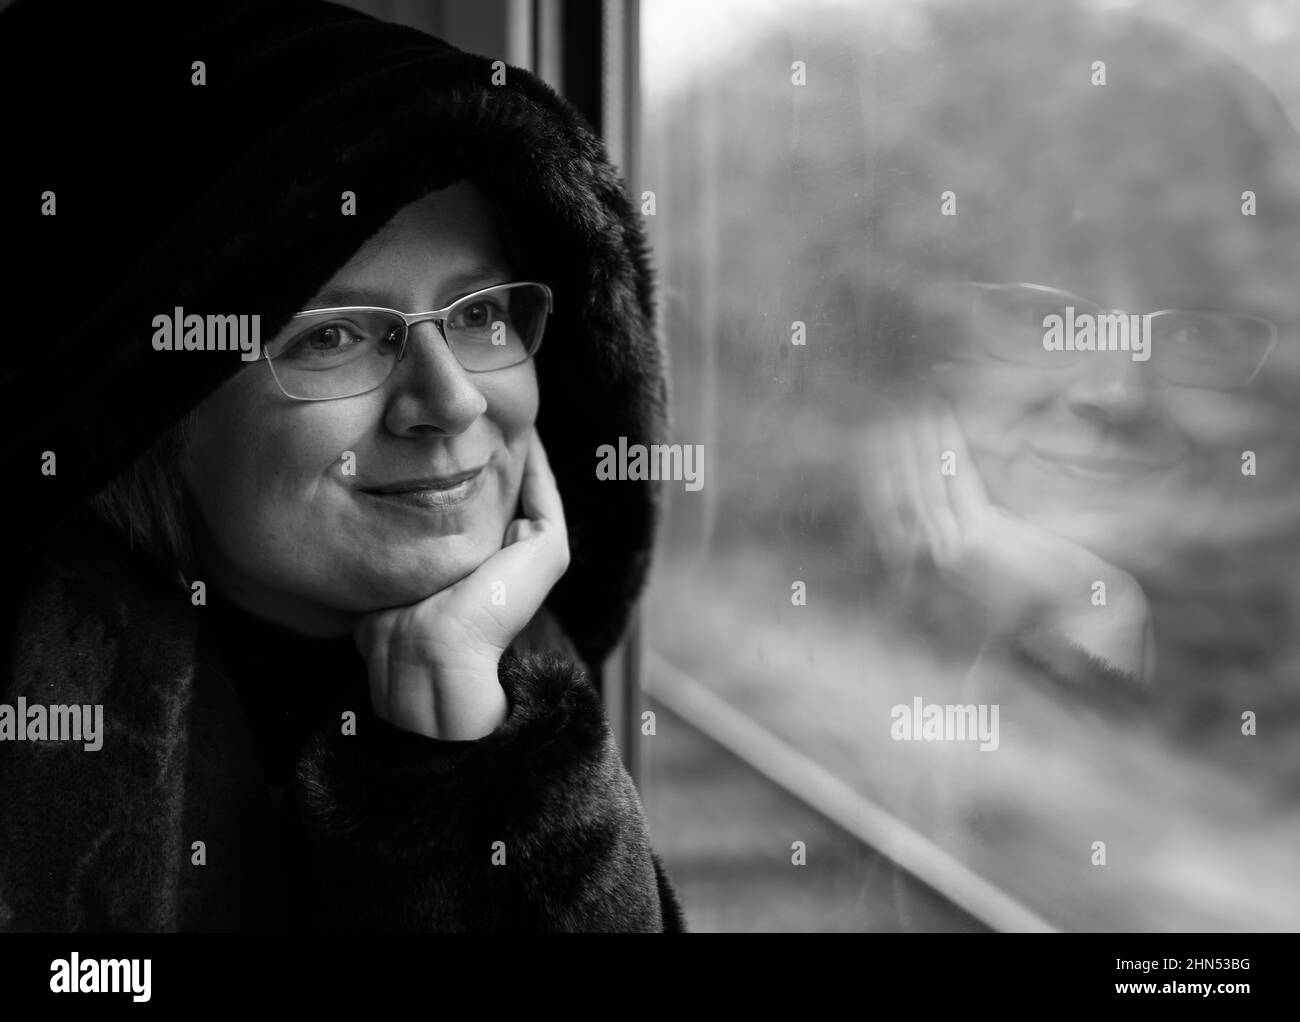 Zellik, Flemish region / Belgium - 04 20 2019: Attractive thirty year old woman looking out of the window of a local train with a furry coat Stock Photo